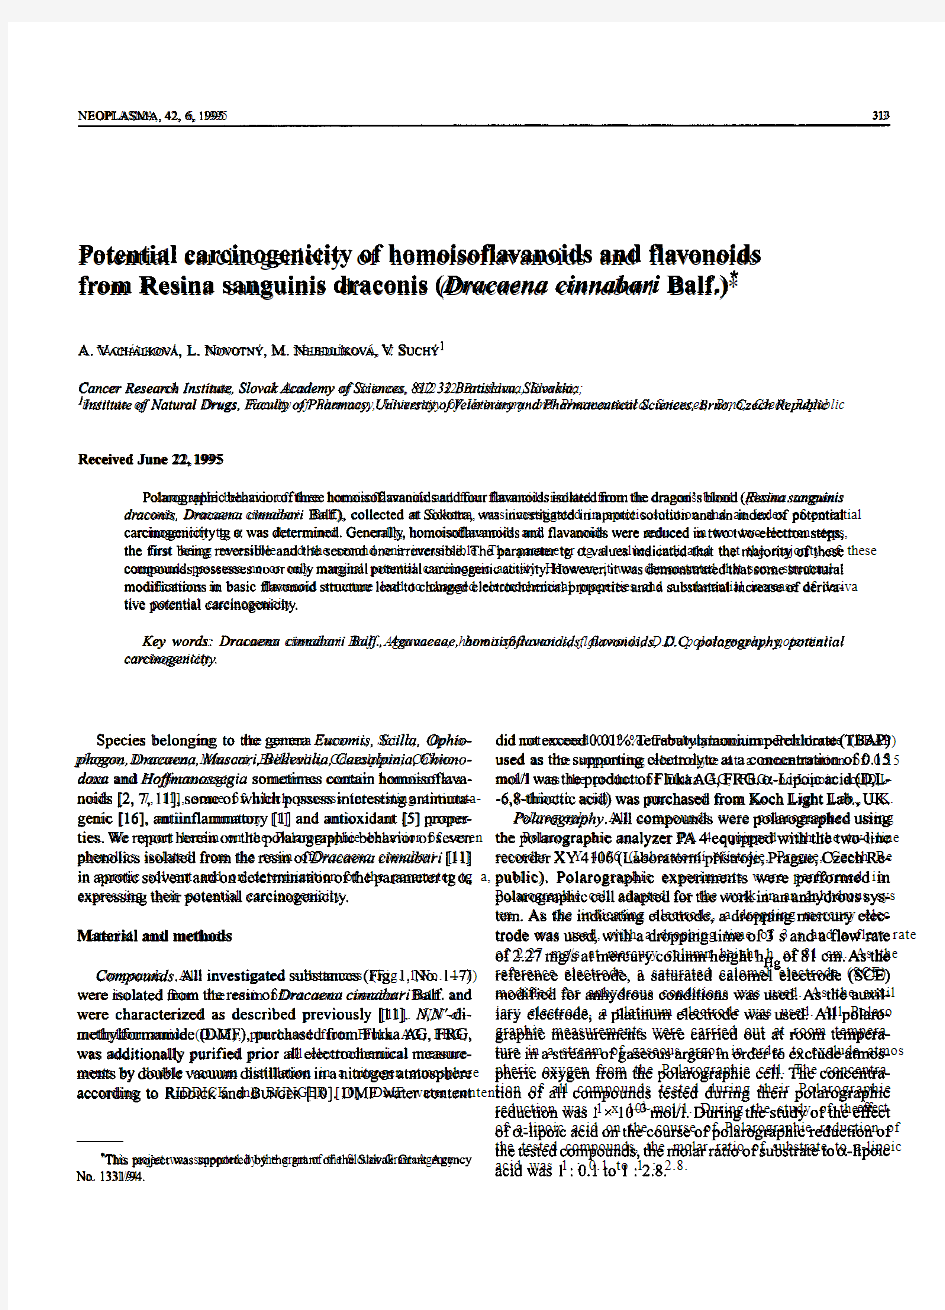 Potential carcinogenicity of homoisoflavanoids and flavonoids from Resina sanguinis draconis